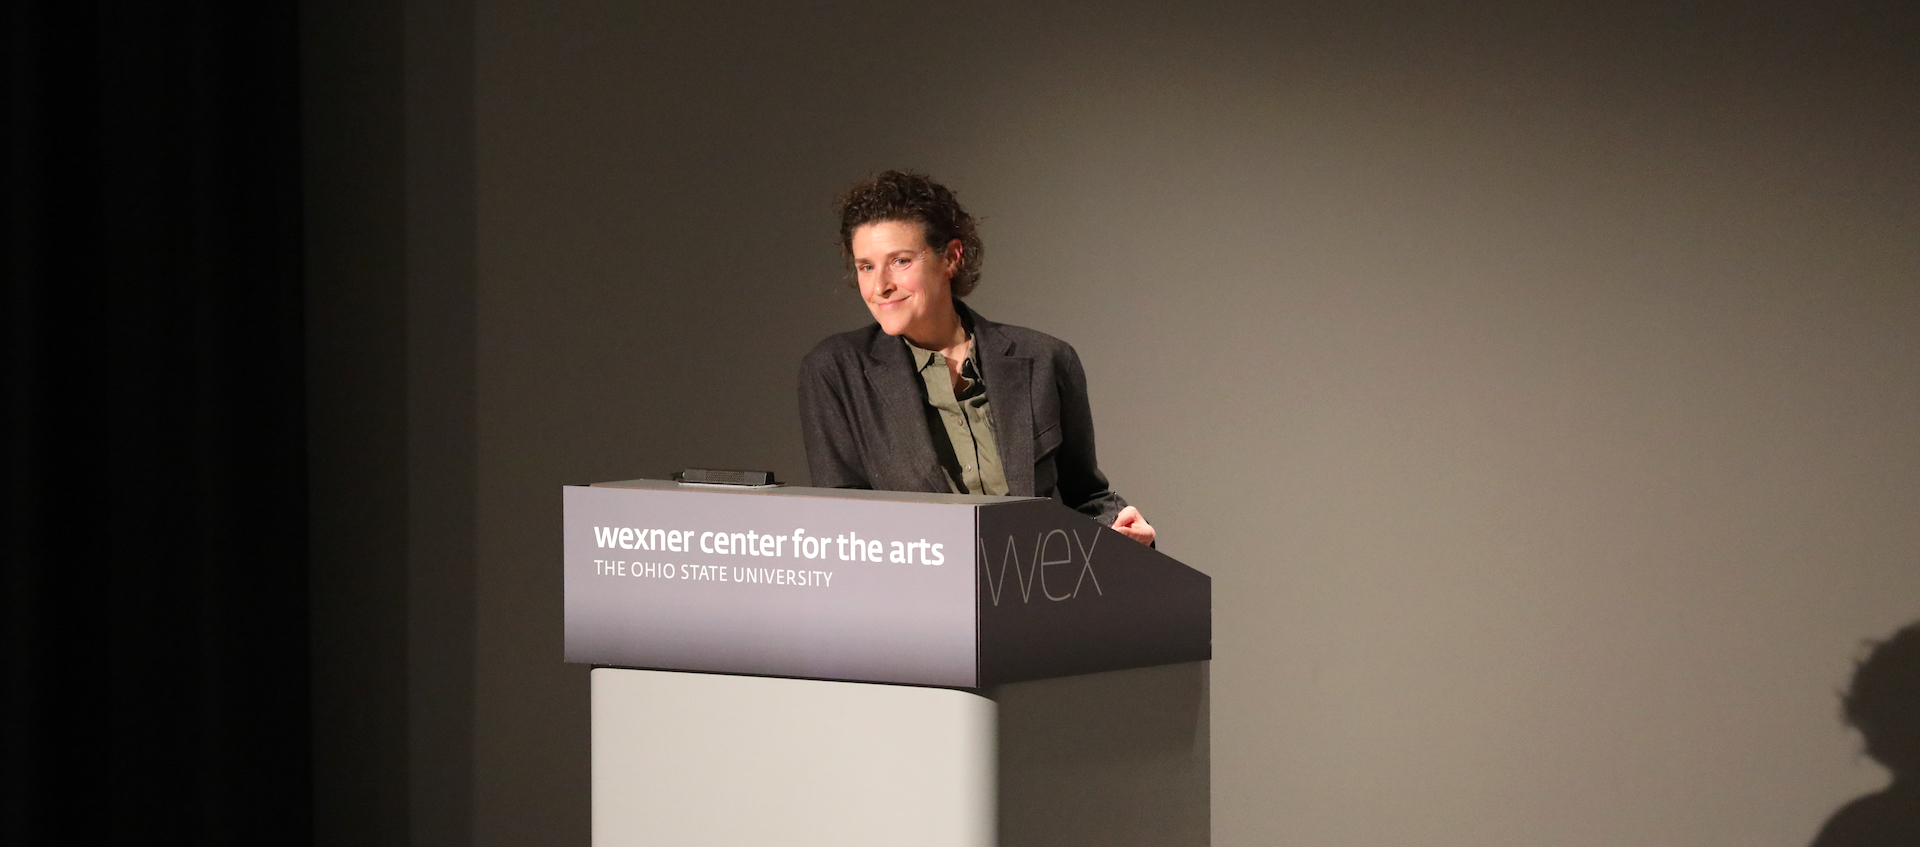 Artist Zoe Leonard at the Wexner Center for the Arts on February 28, 2019